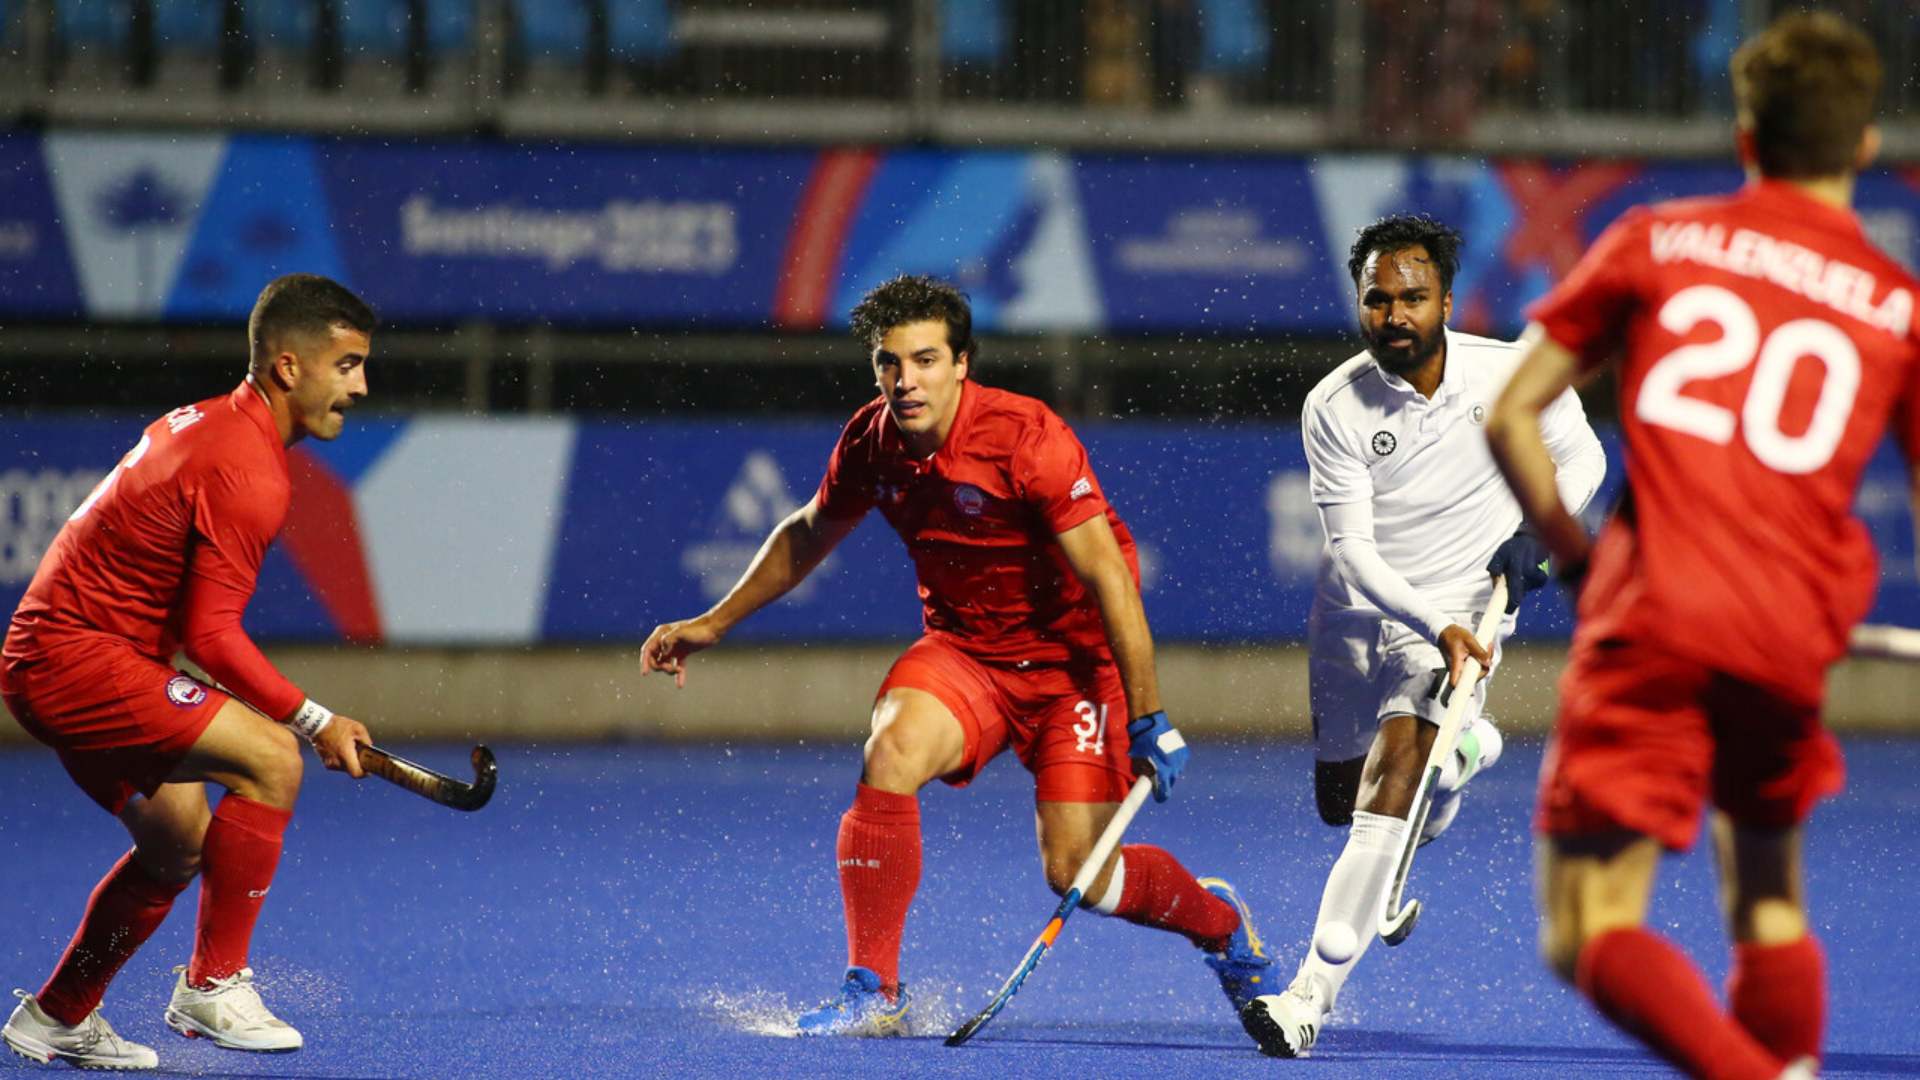 Chile advances to field hockey final by defeating Canada in penalty shootout